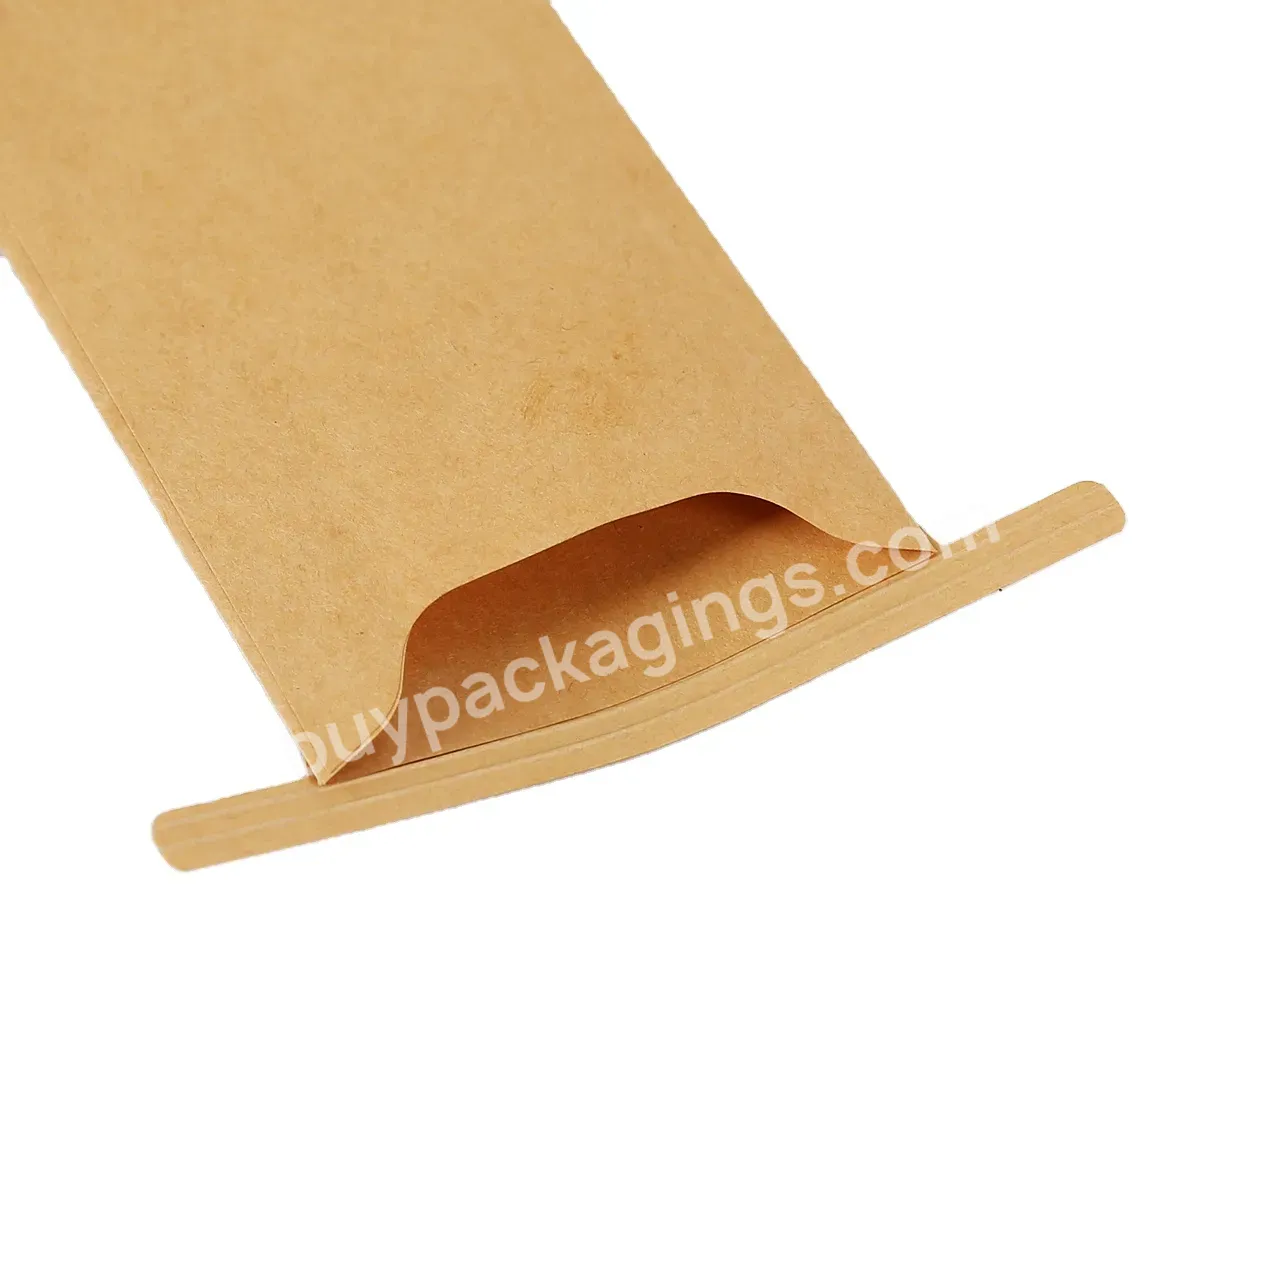 Factory Outlet Wholesale Stock Recyclable Kraft Paper Envelopes With Iron Wire Seal - Buy Kraft Paper Envelopes,Kraft Paper Envelopes With Iron Wire Seal,Wholesale Stock Paper Envelopes.